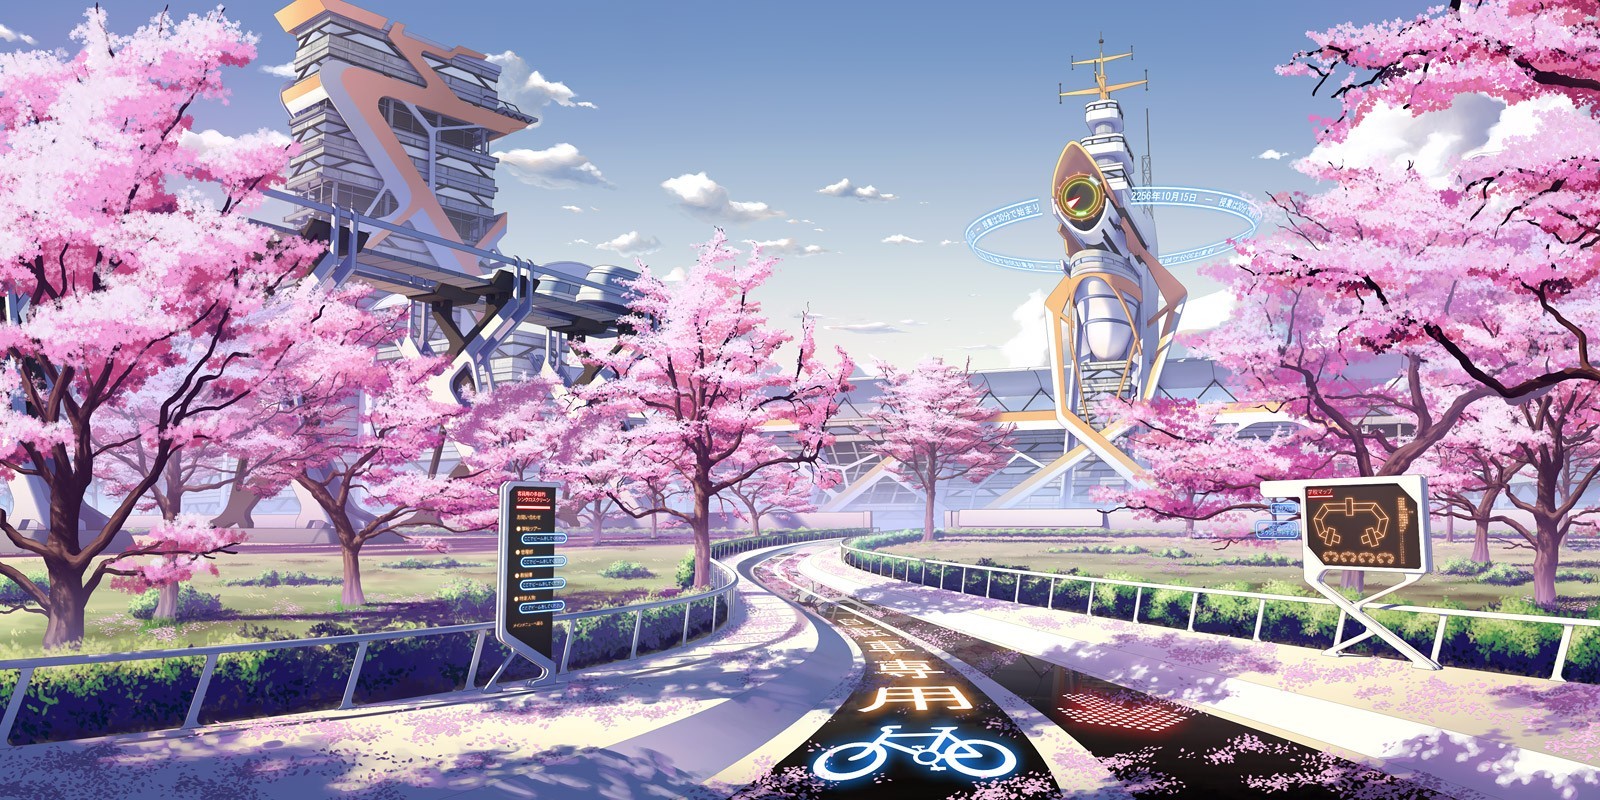 Anime 1600x800 Culture Japan anime colorful science fiction cherry blossom spring